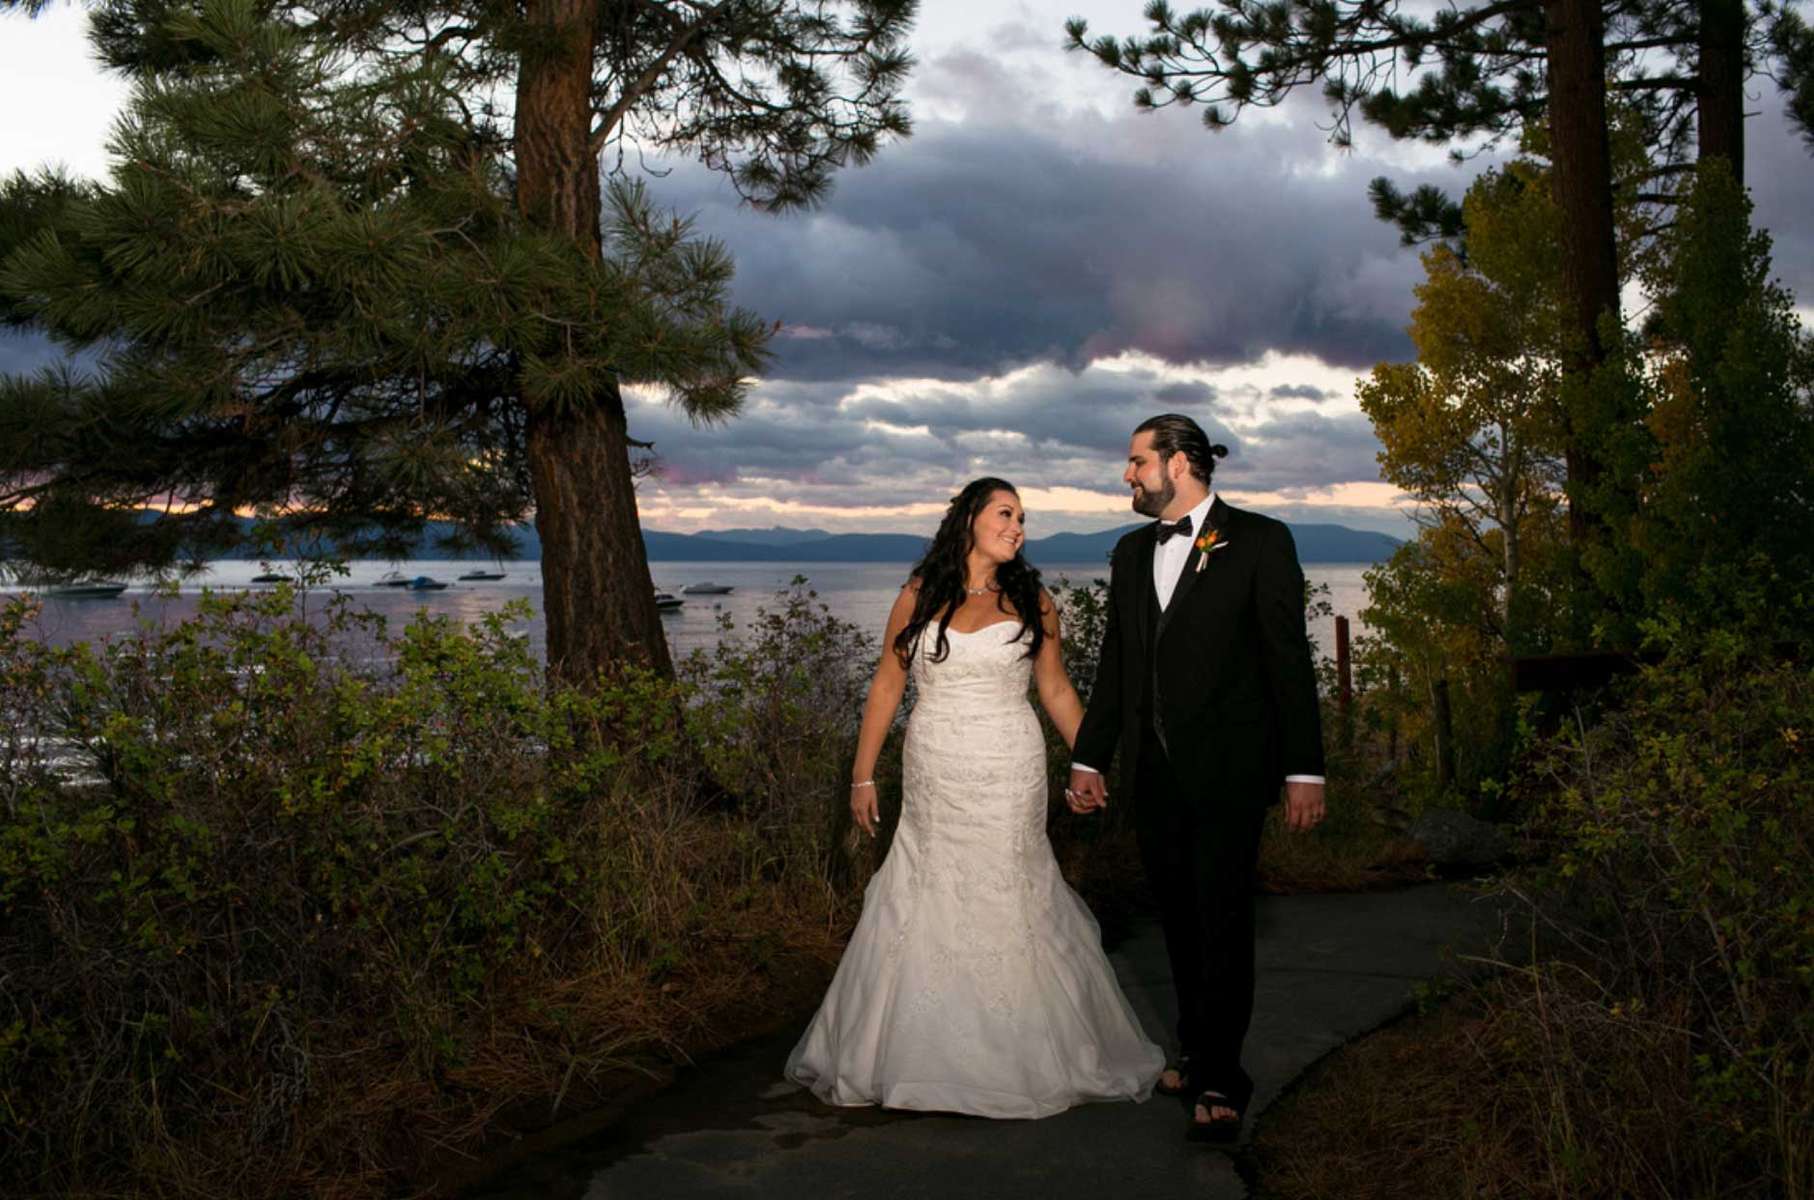 With the azure waters of the lake as their backdrop and the crisp mountain air as witness, their ceremony was a picturesque moment of love and connection. Surrounded by the serene beauty of nature, their wedding in Tahoe was an intimate and unforgettable celebration of their commitment to one another.